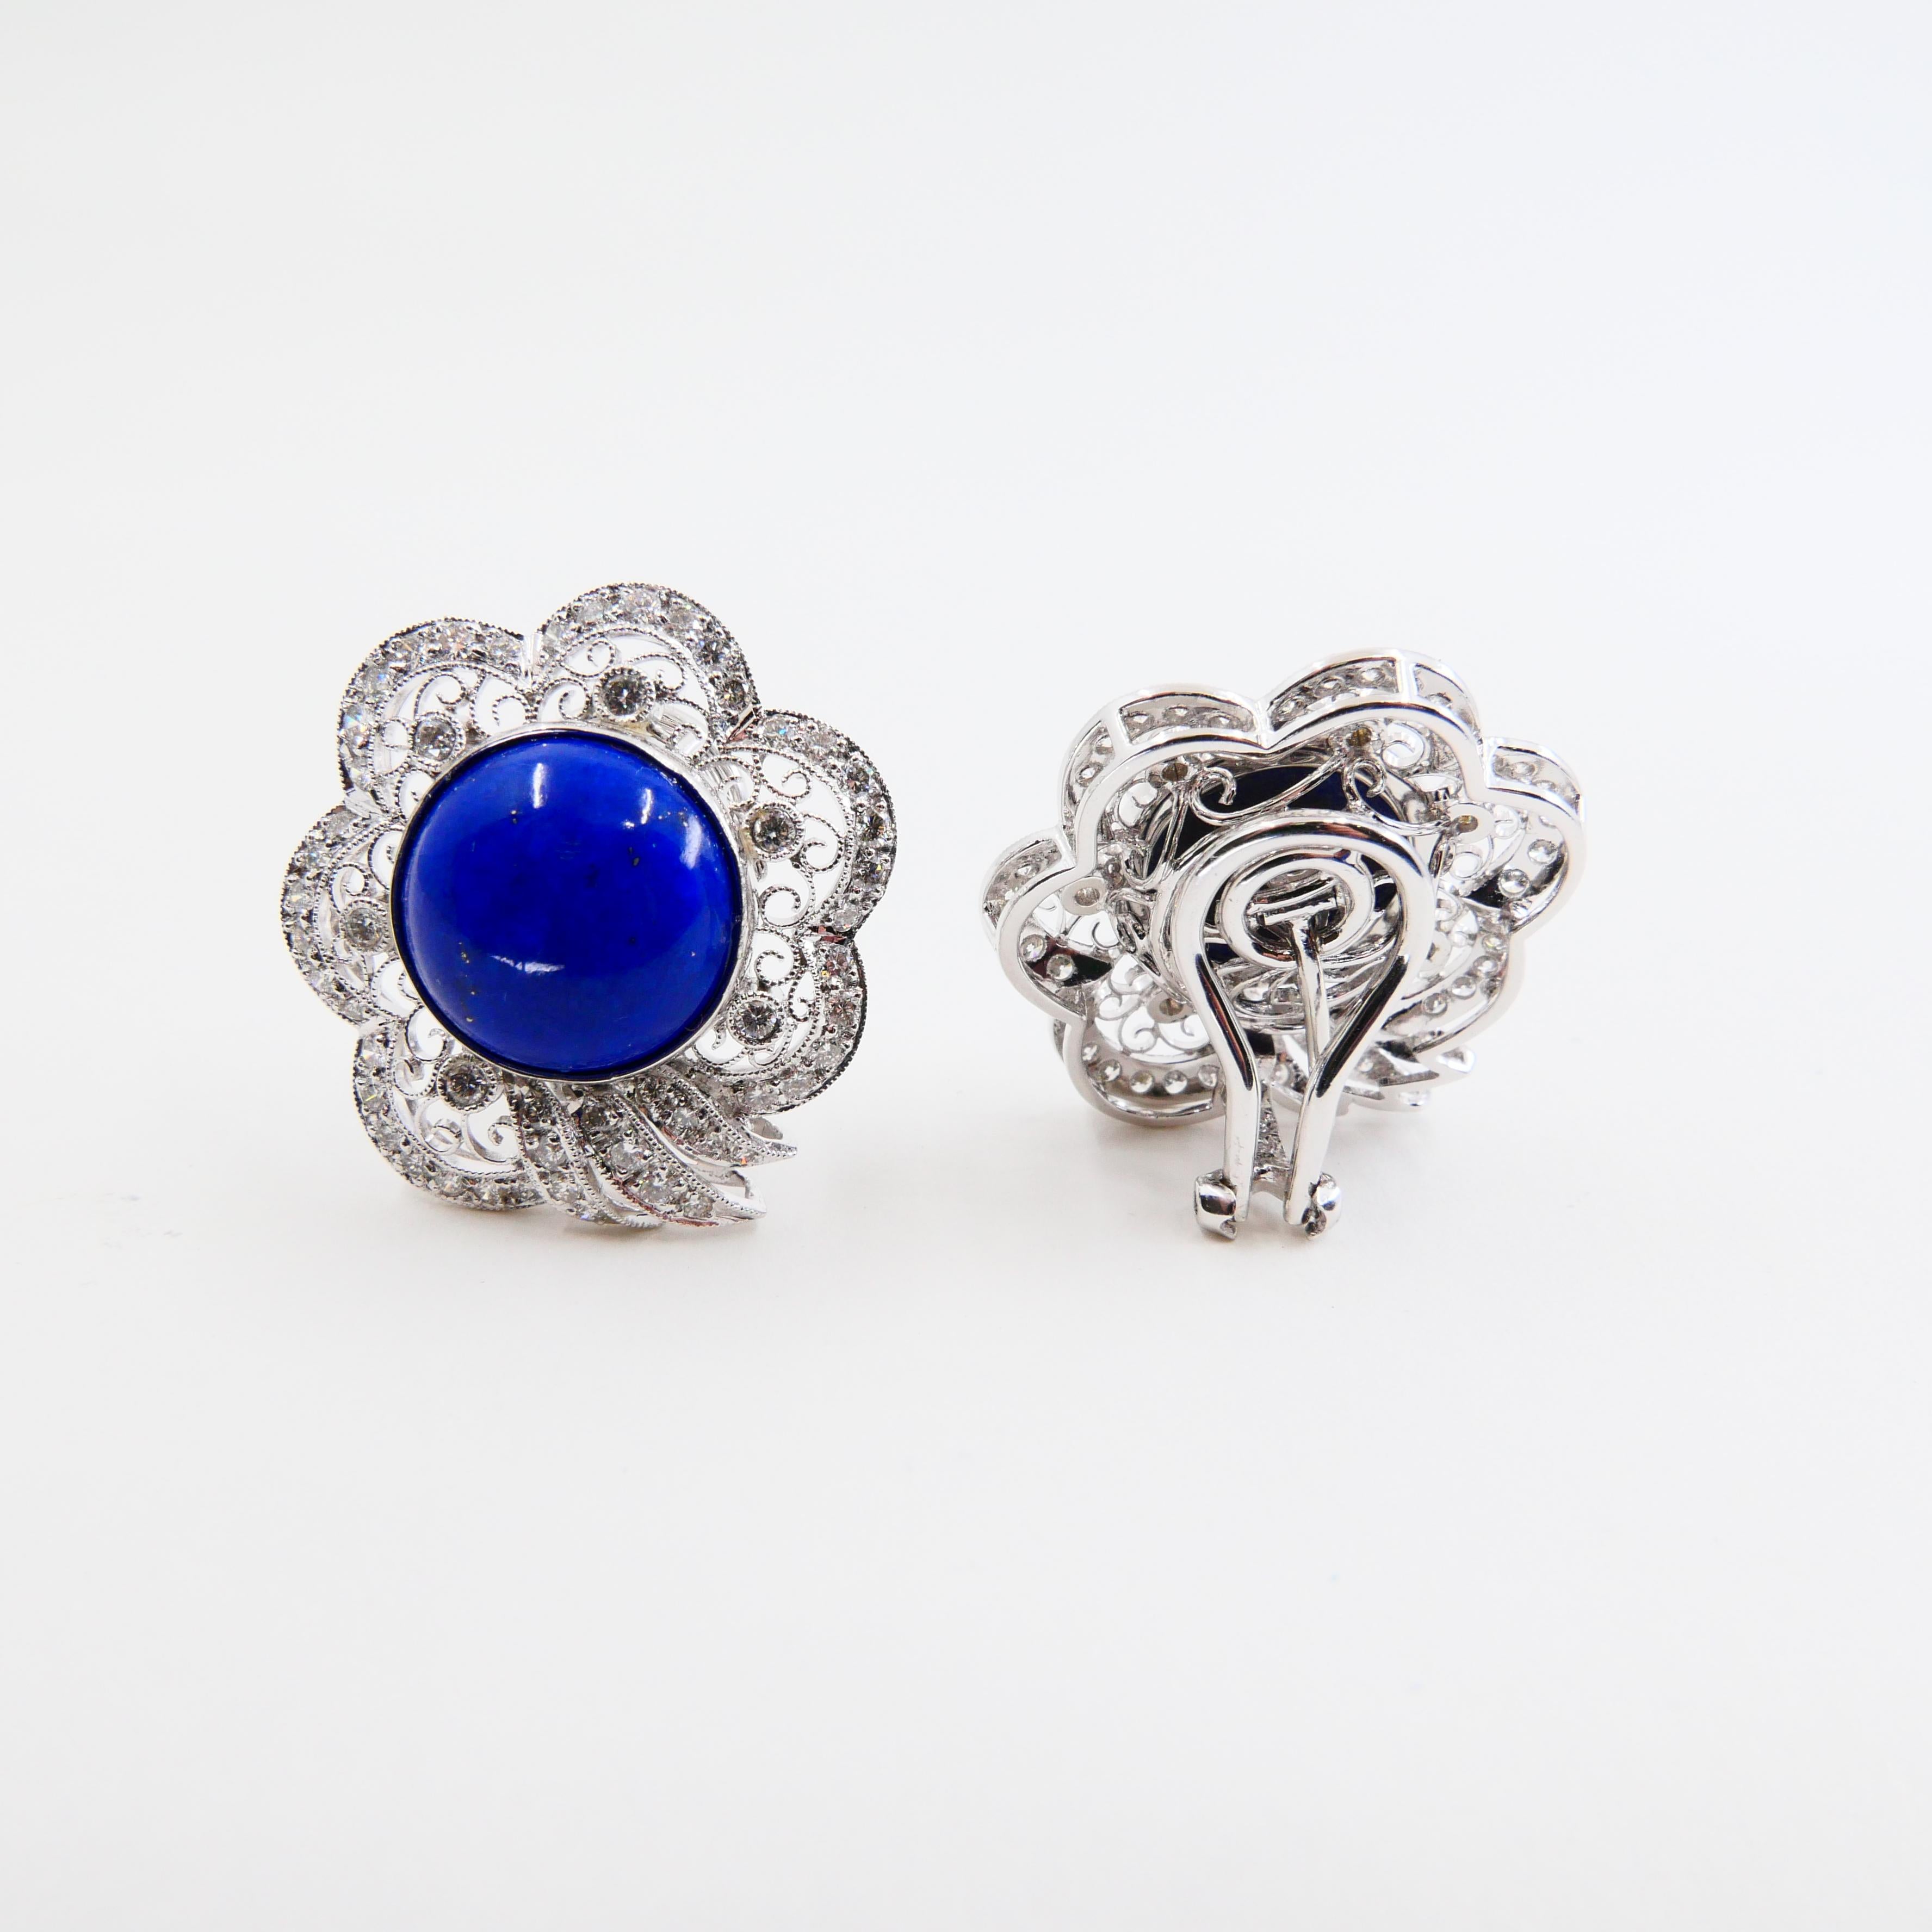 Round Cut Royal Blue Lapis Lazuli And Diamond Earrings With Natural Gold Veins & Spots For Sale